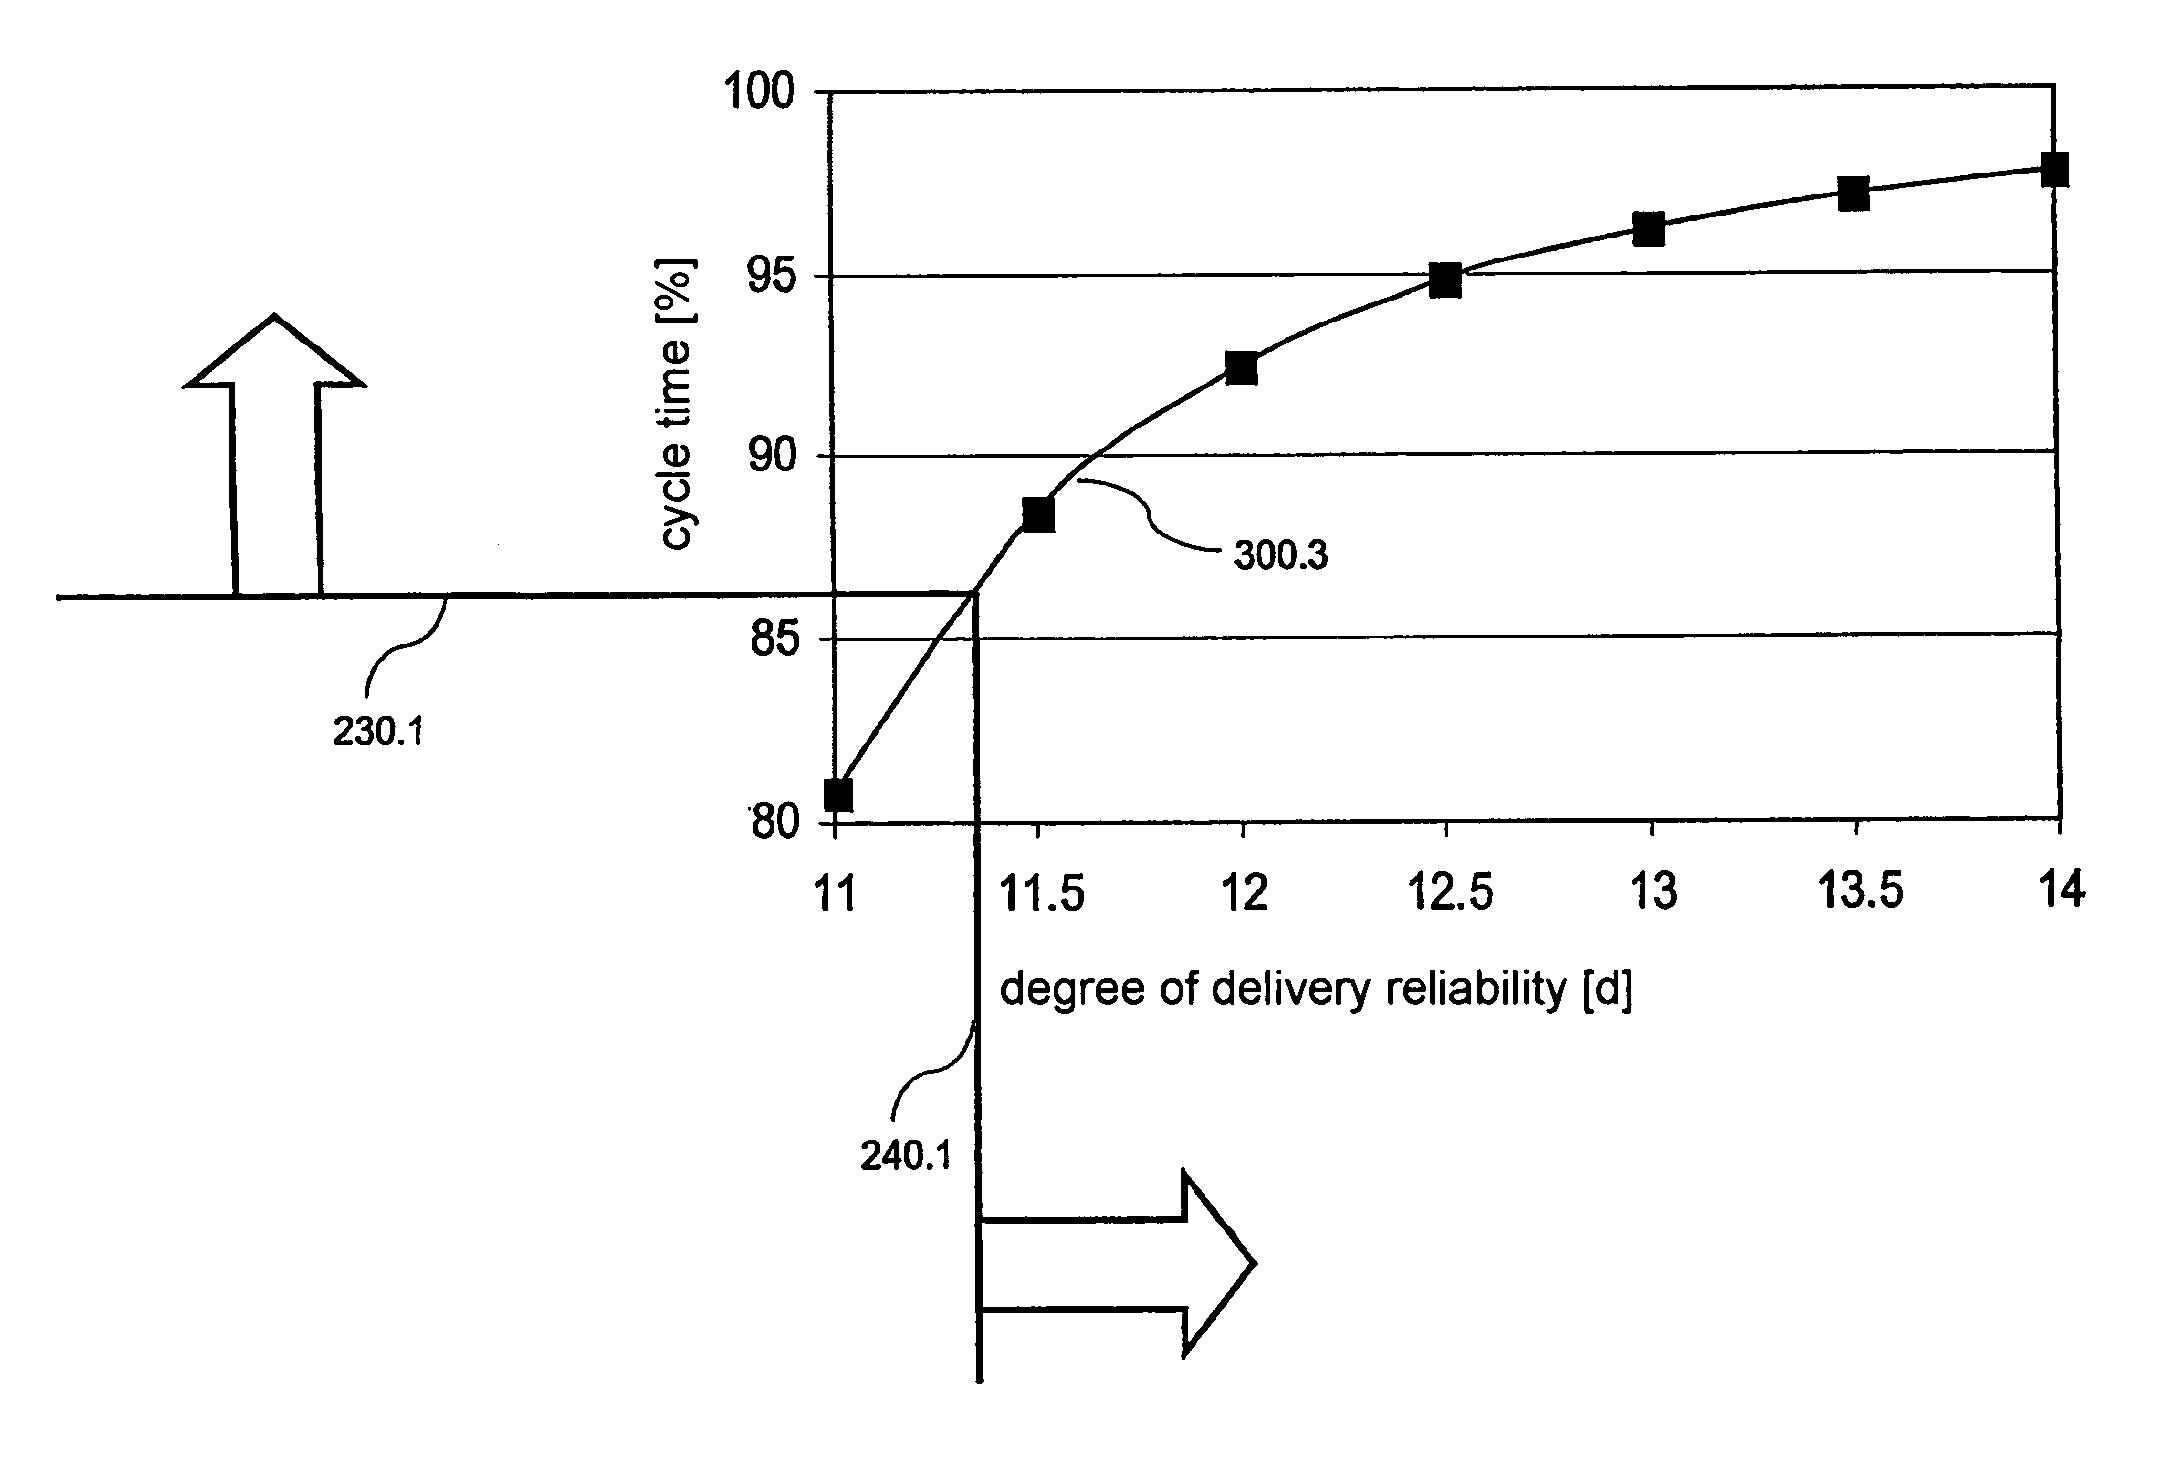 Prediction of the degree of delivery reliability in serial production